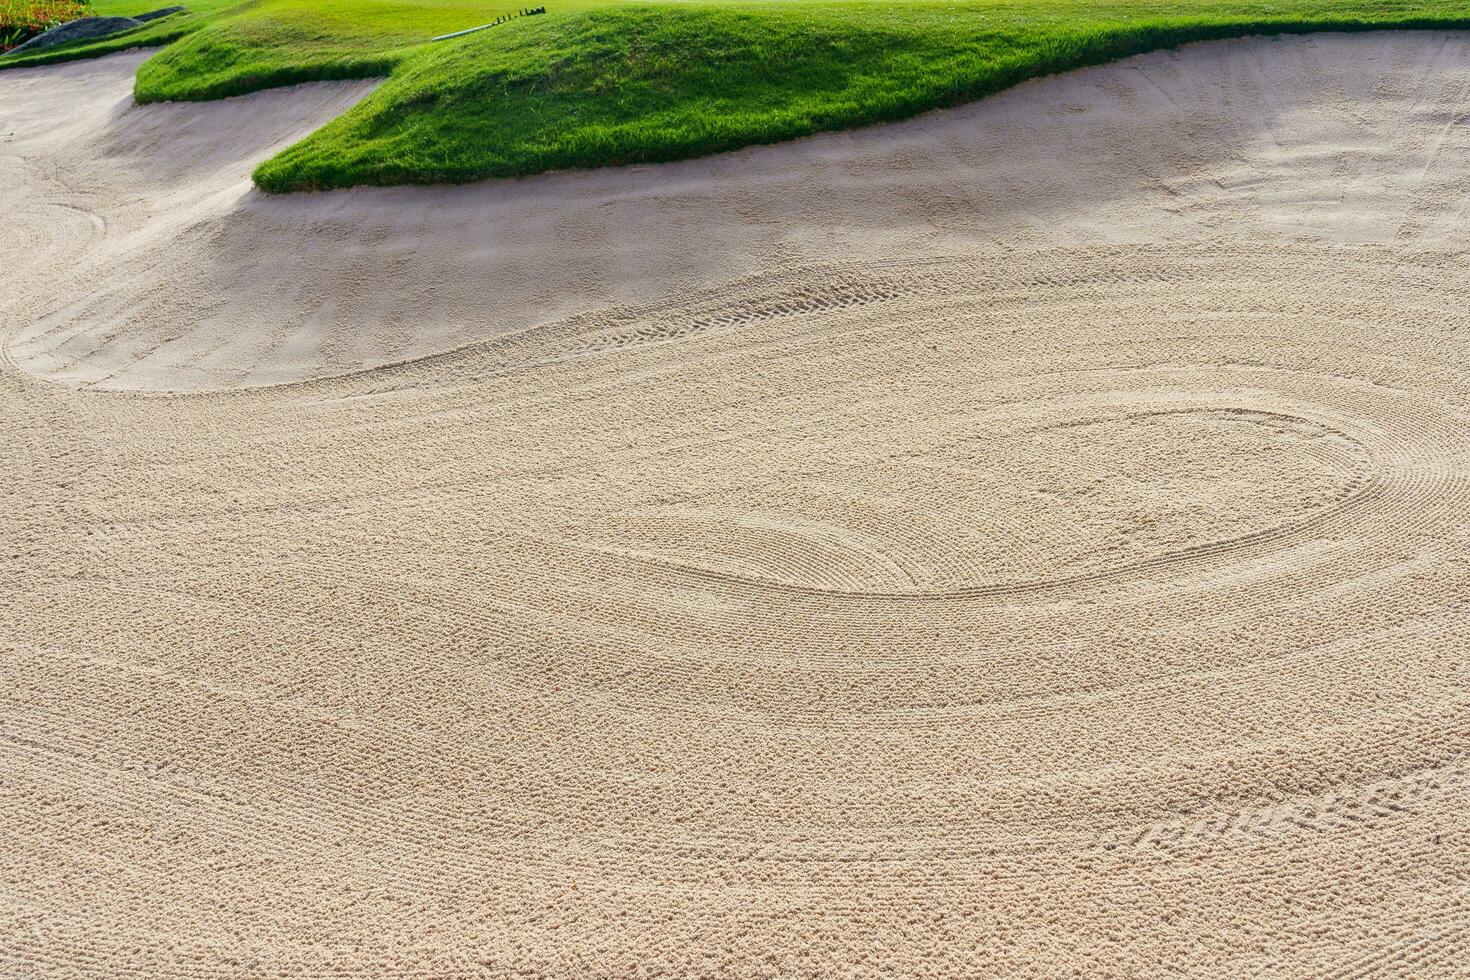 Golf course sand pit bunker aesthetic background,Used as obstacles for golf competitions for difficulty and falling off the course for beauty photo